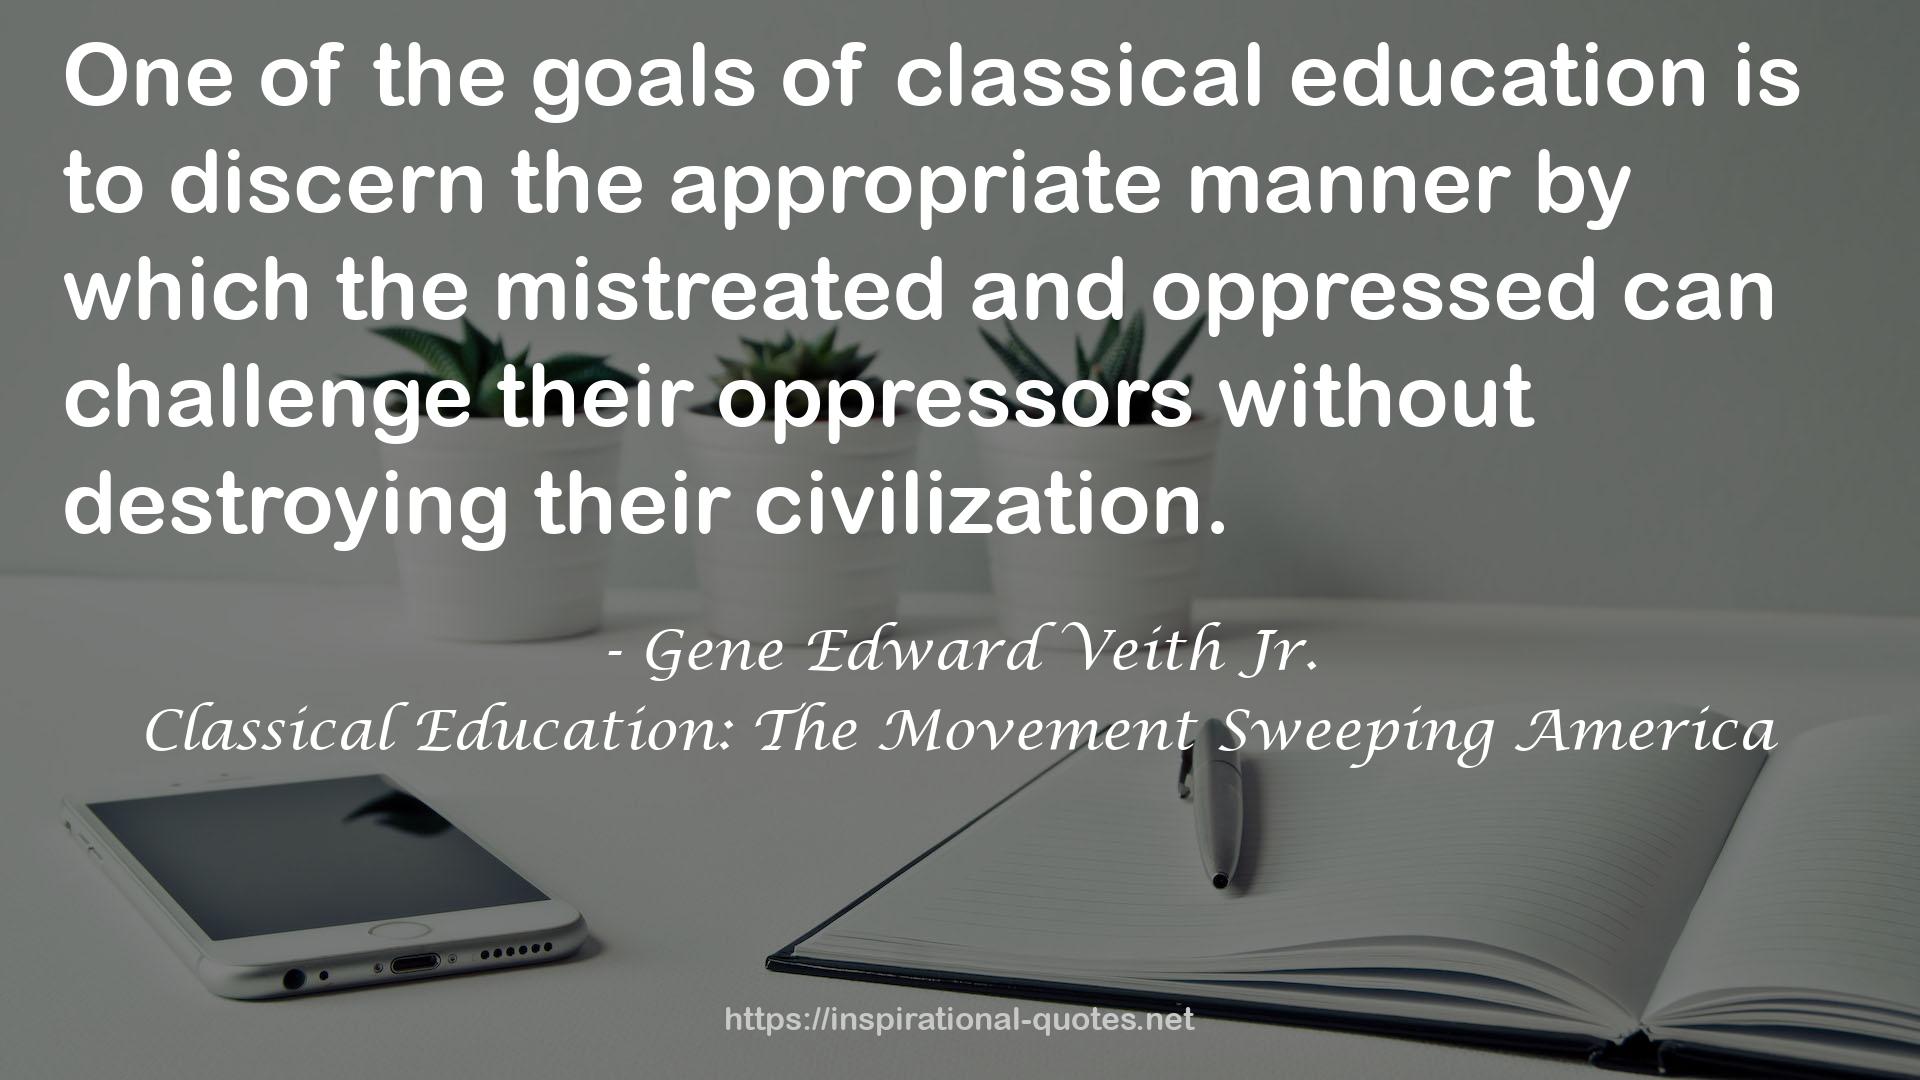 Classical Education: The Movement Sweeping America QUOTES